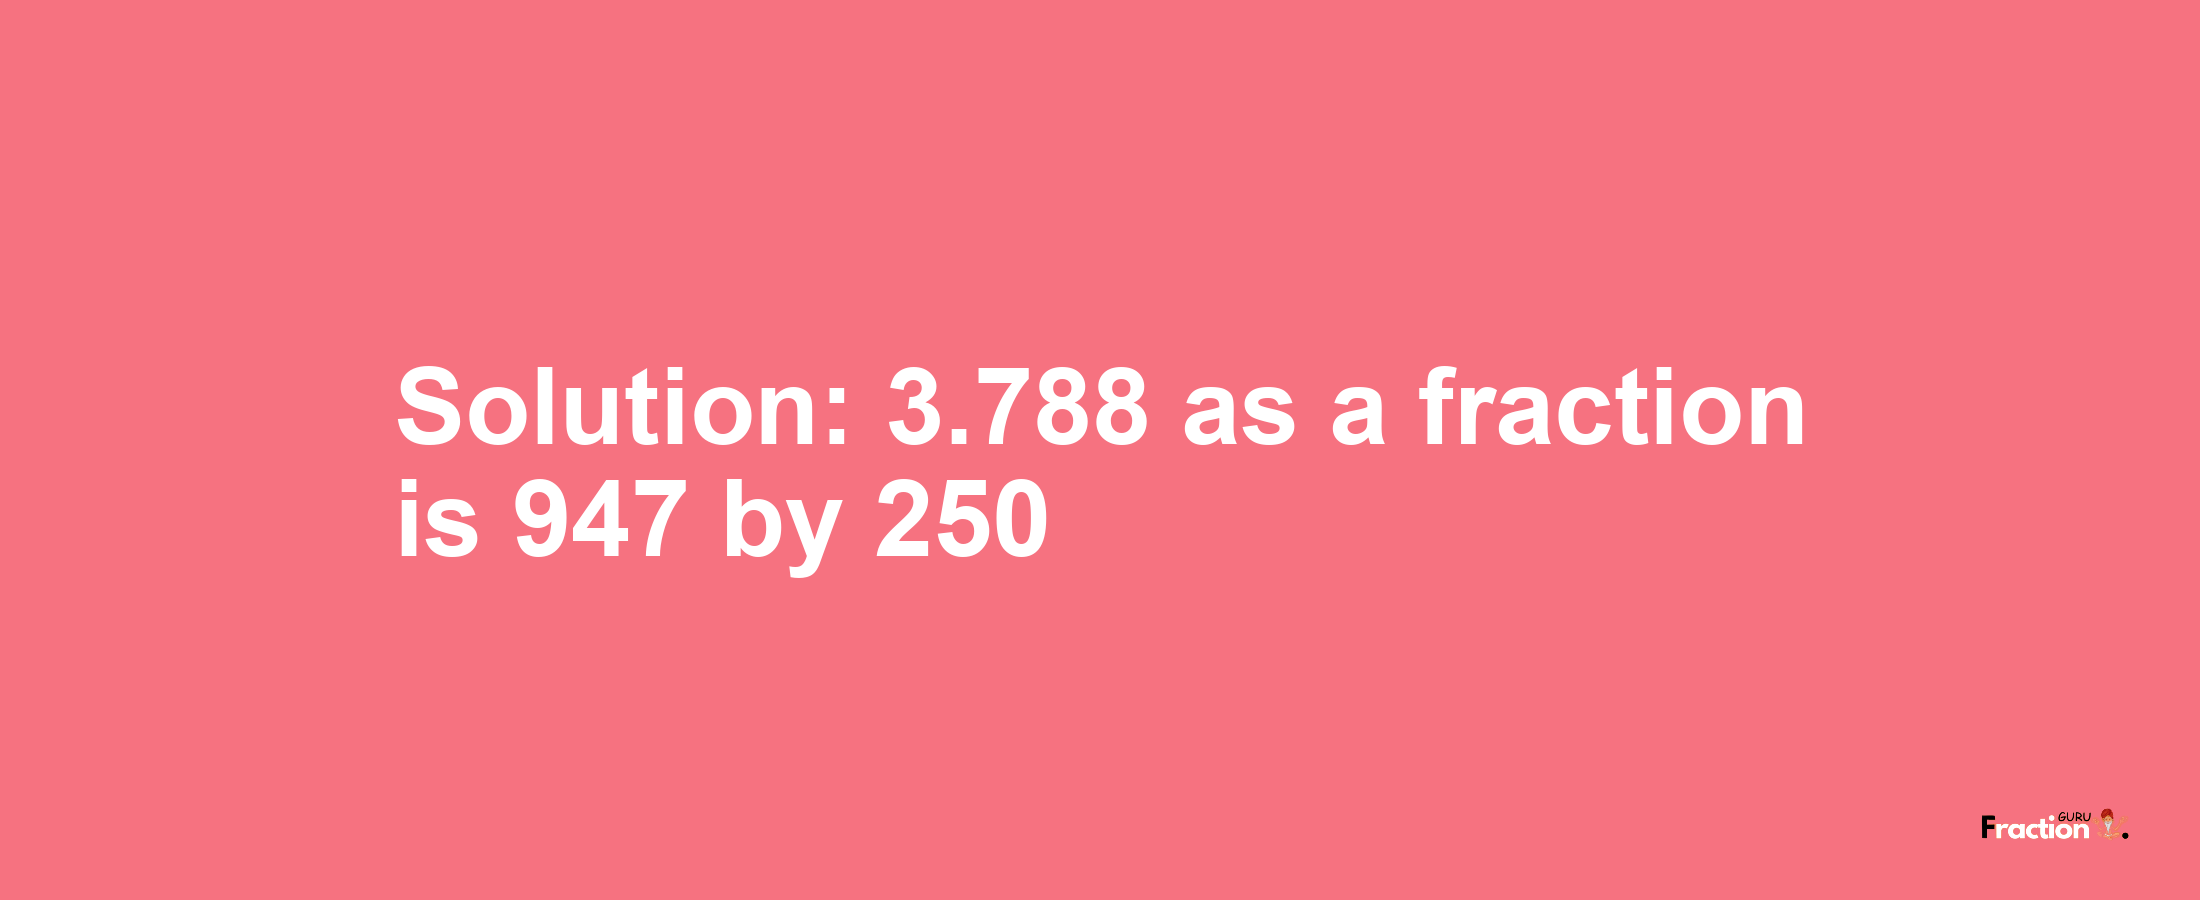 Solution:3.788 as a fraction is 947/250